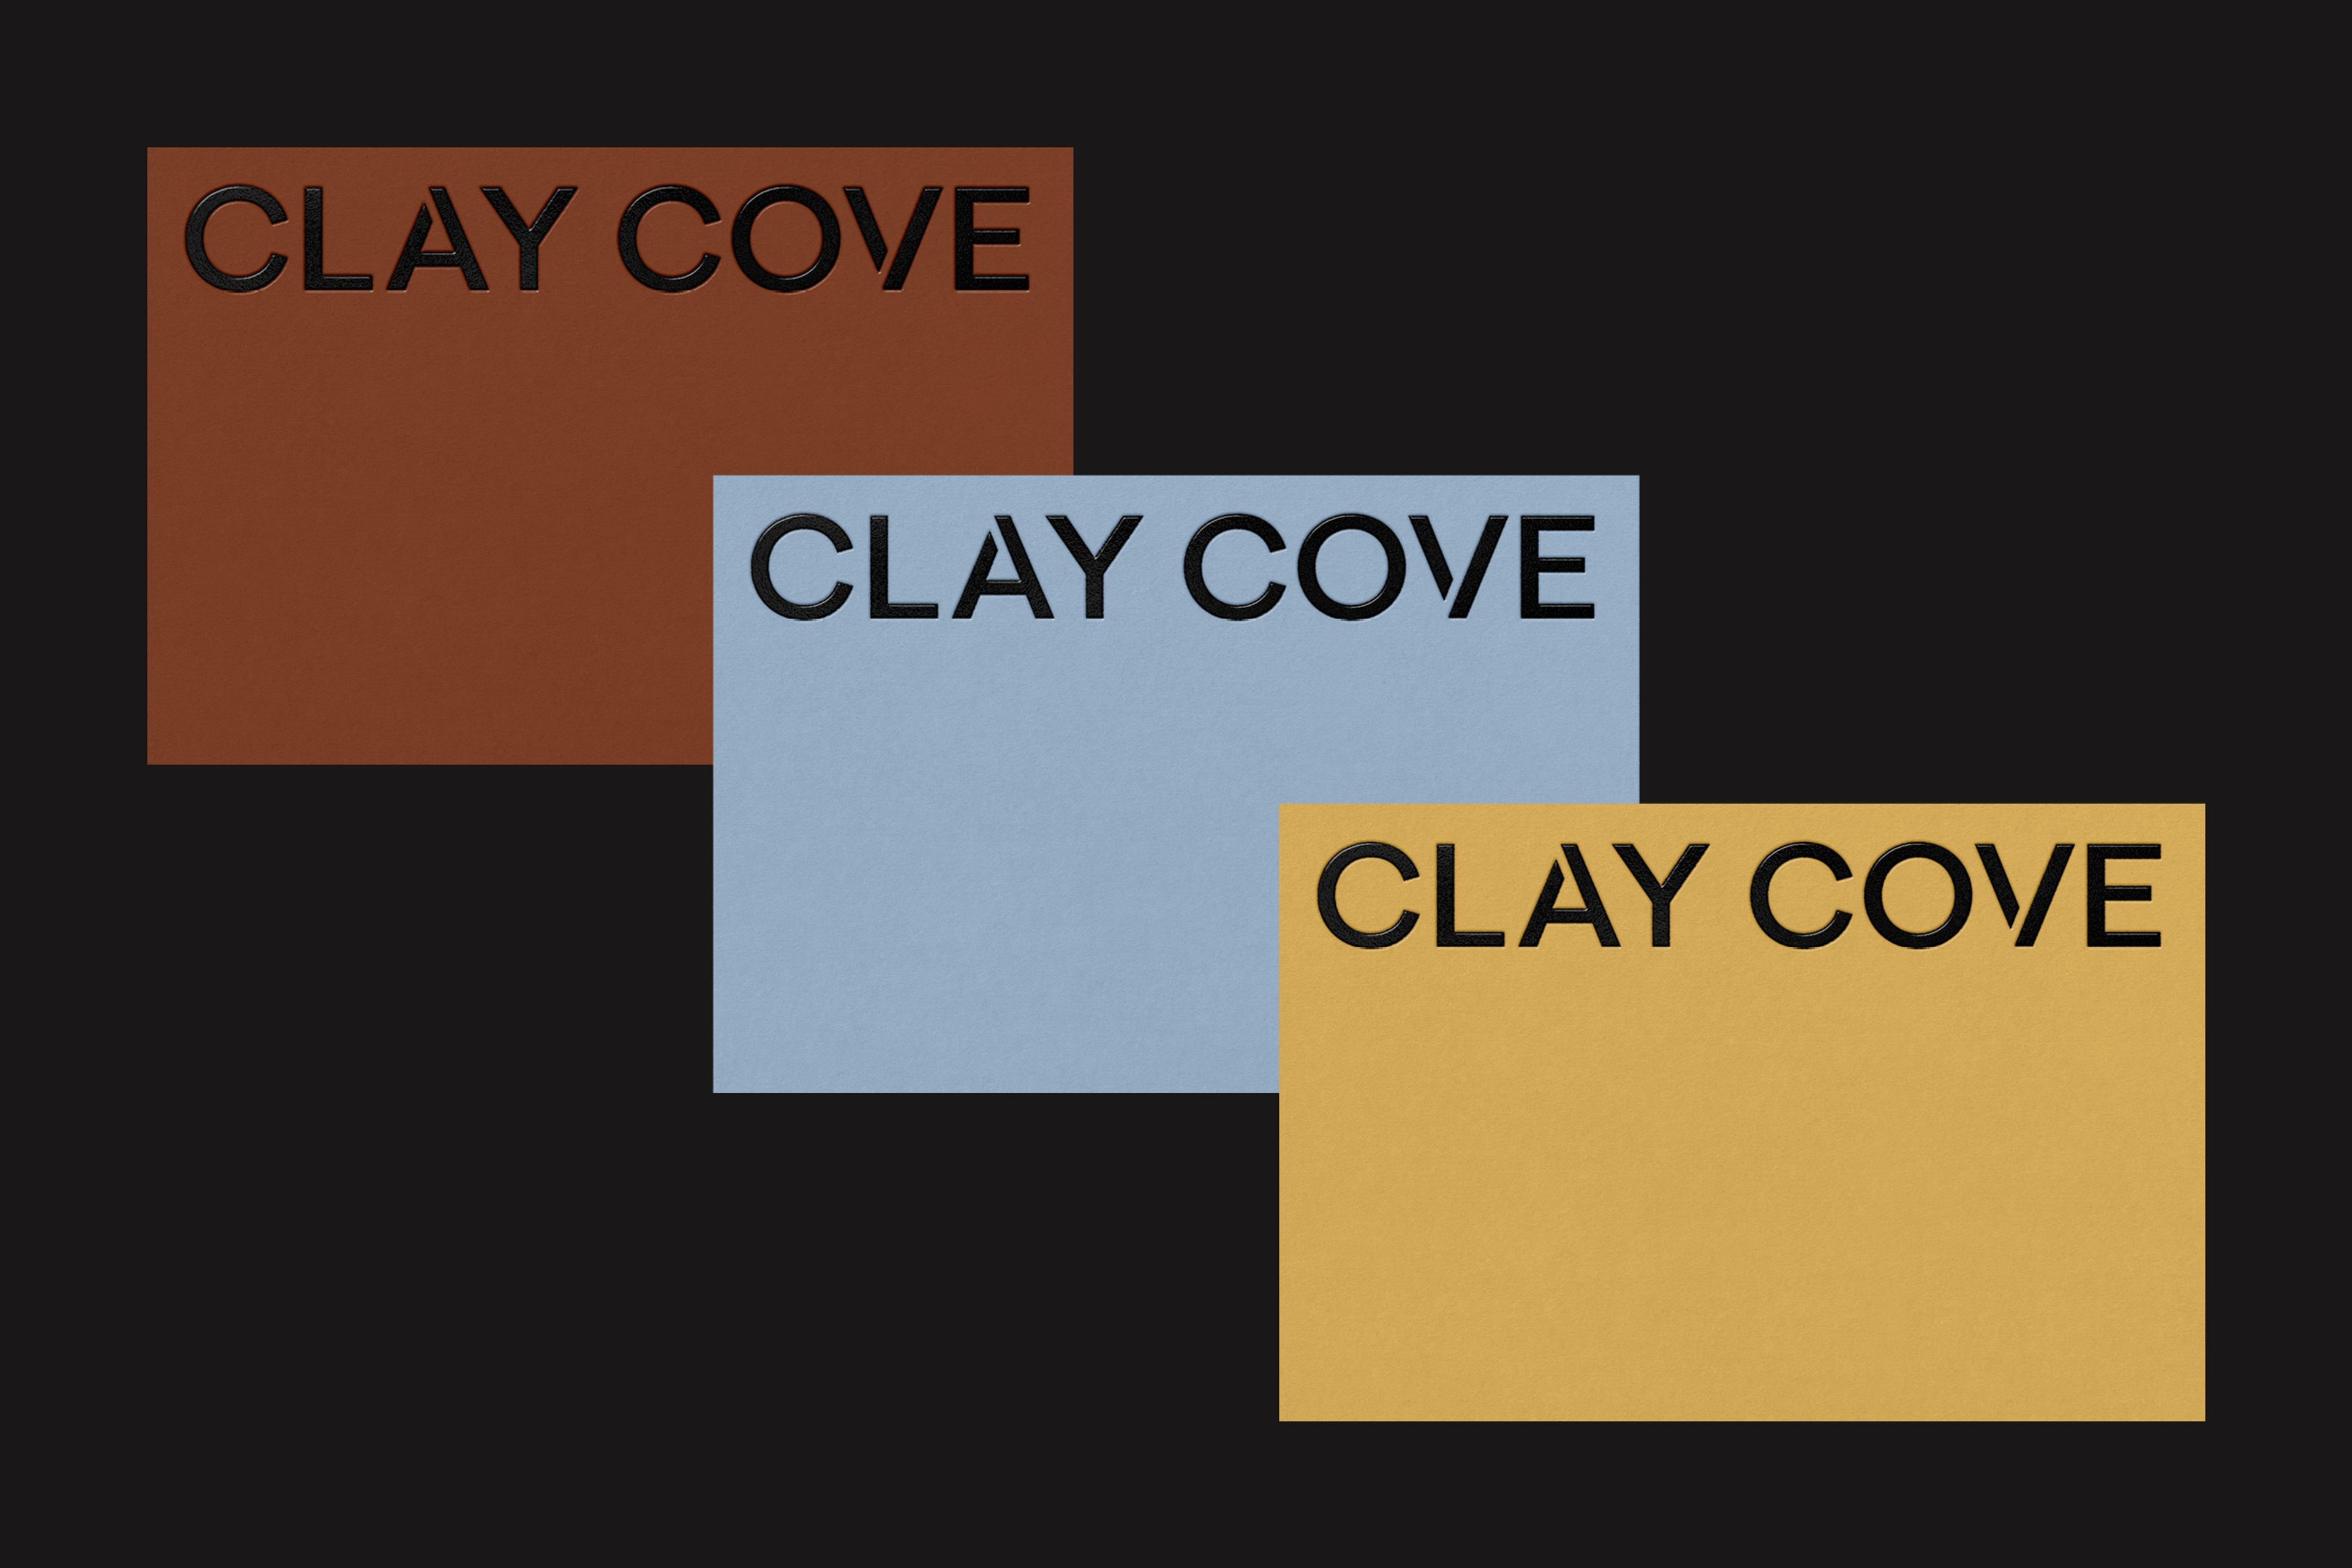 Two Are - Clay Cove